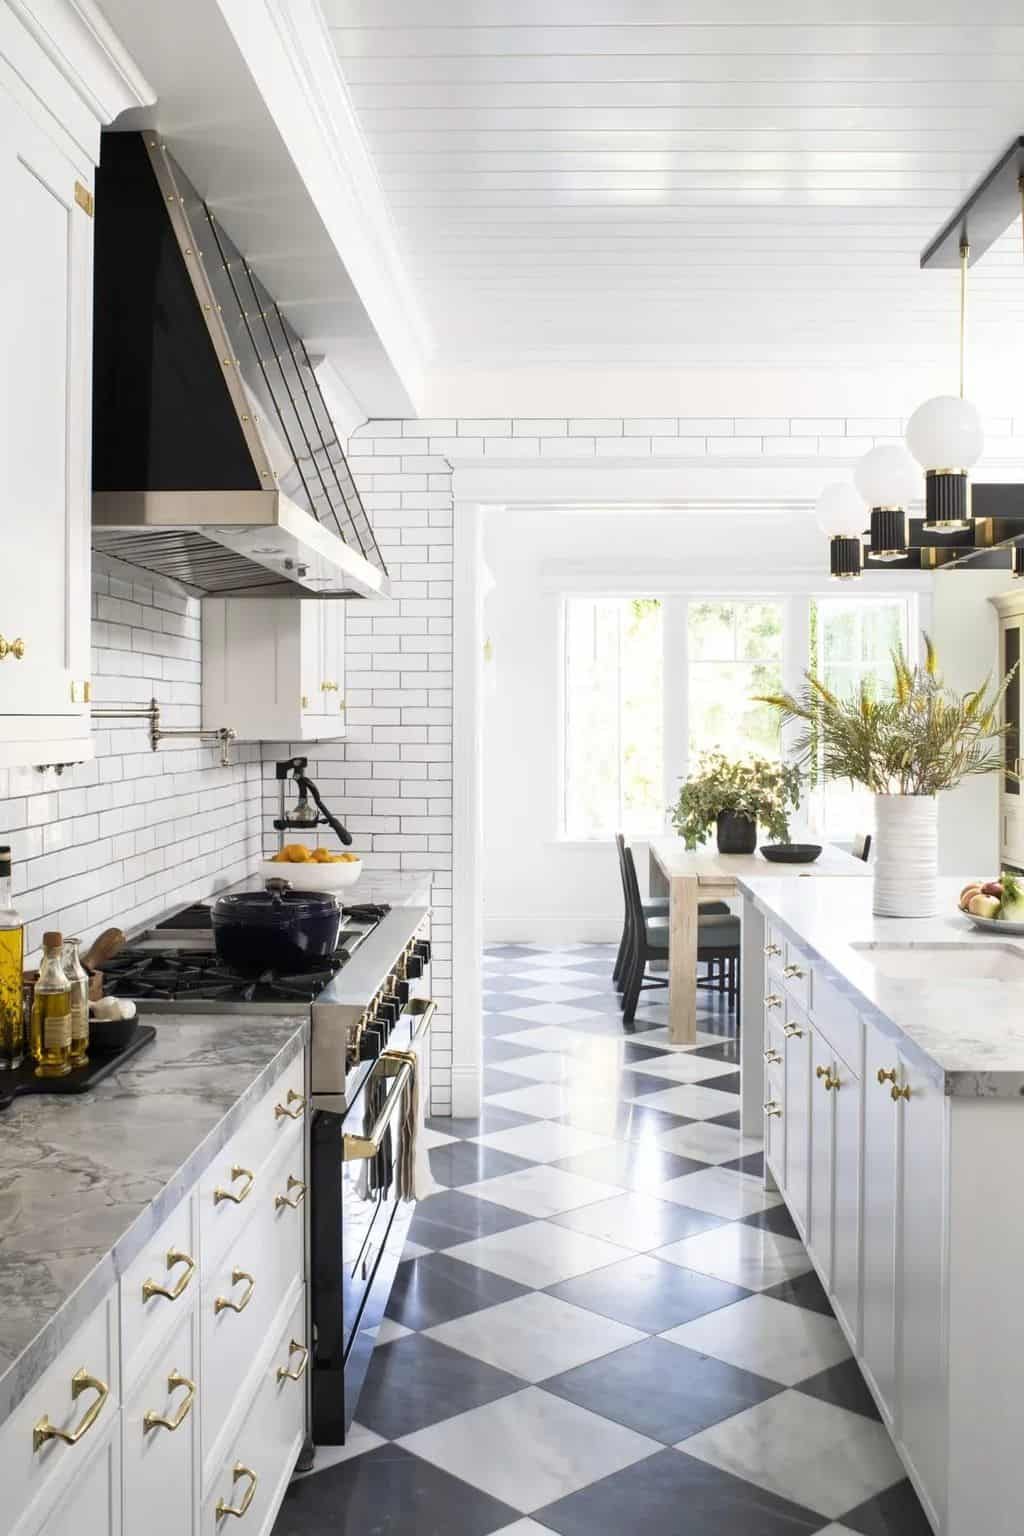 Monochrome Magic: Stunning Black and White Kitchen Ideas to Transform Your Space